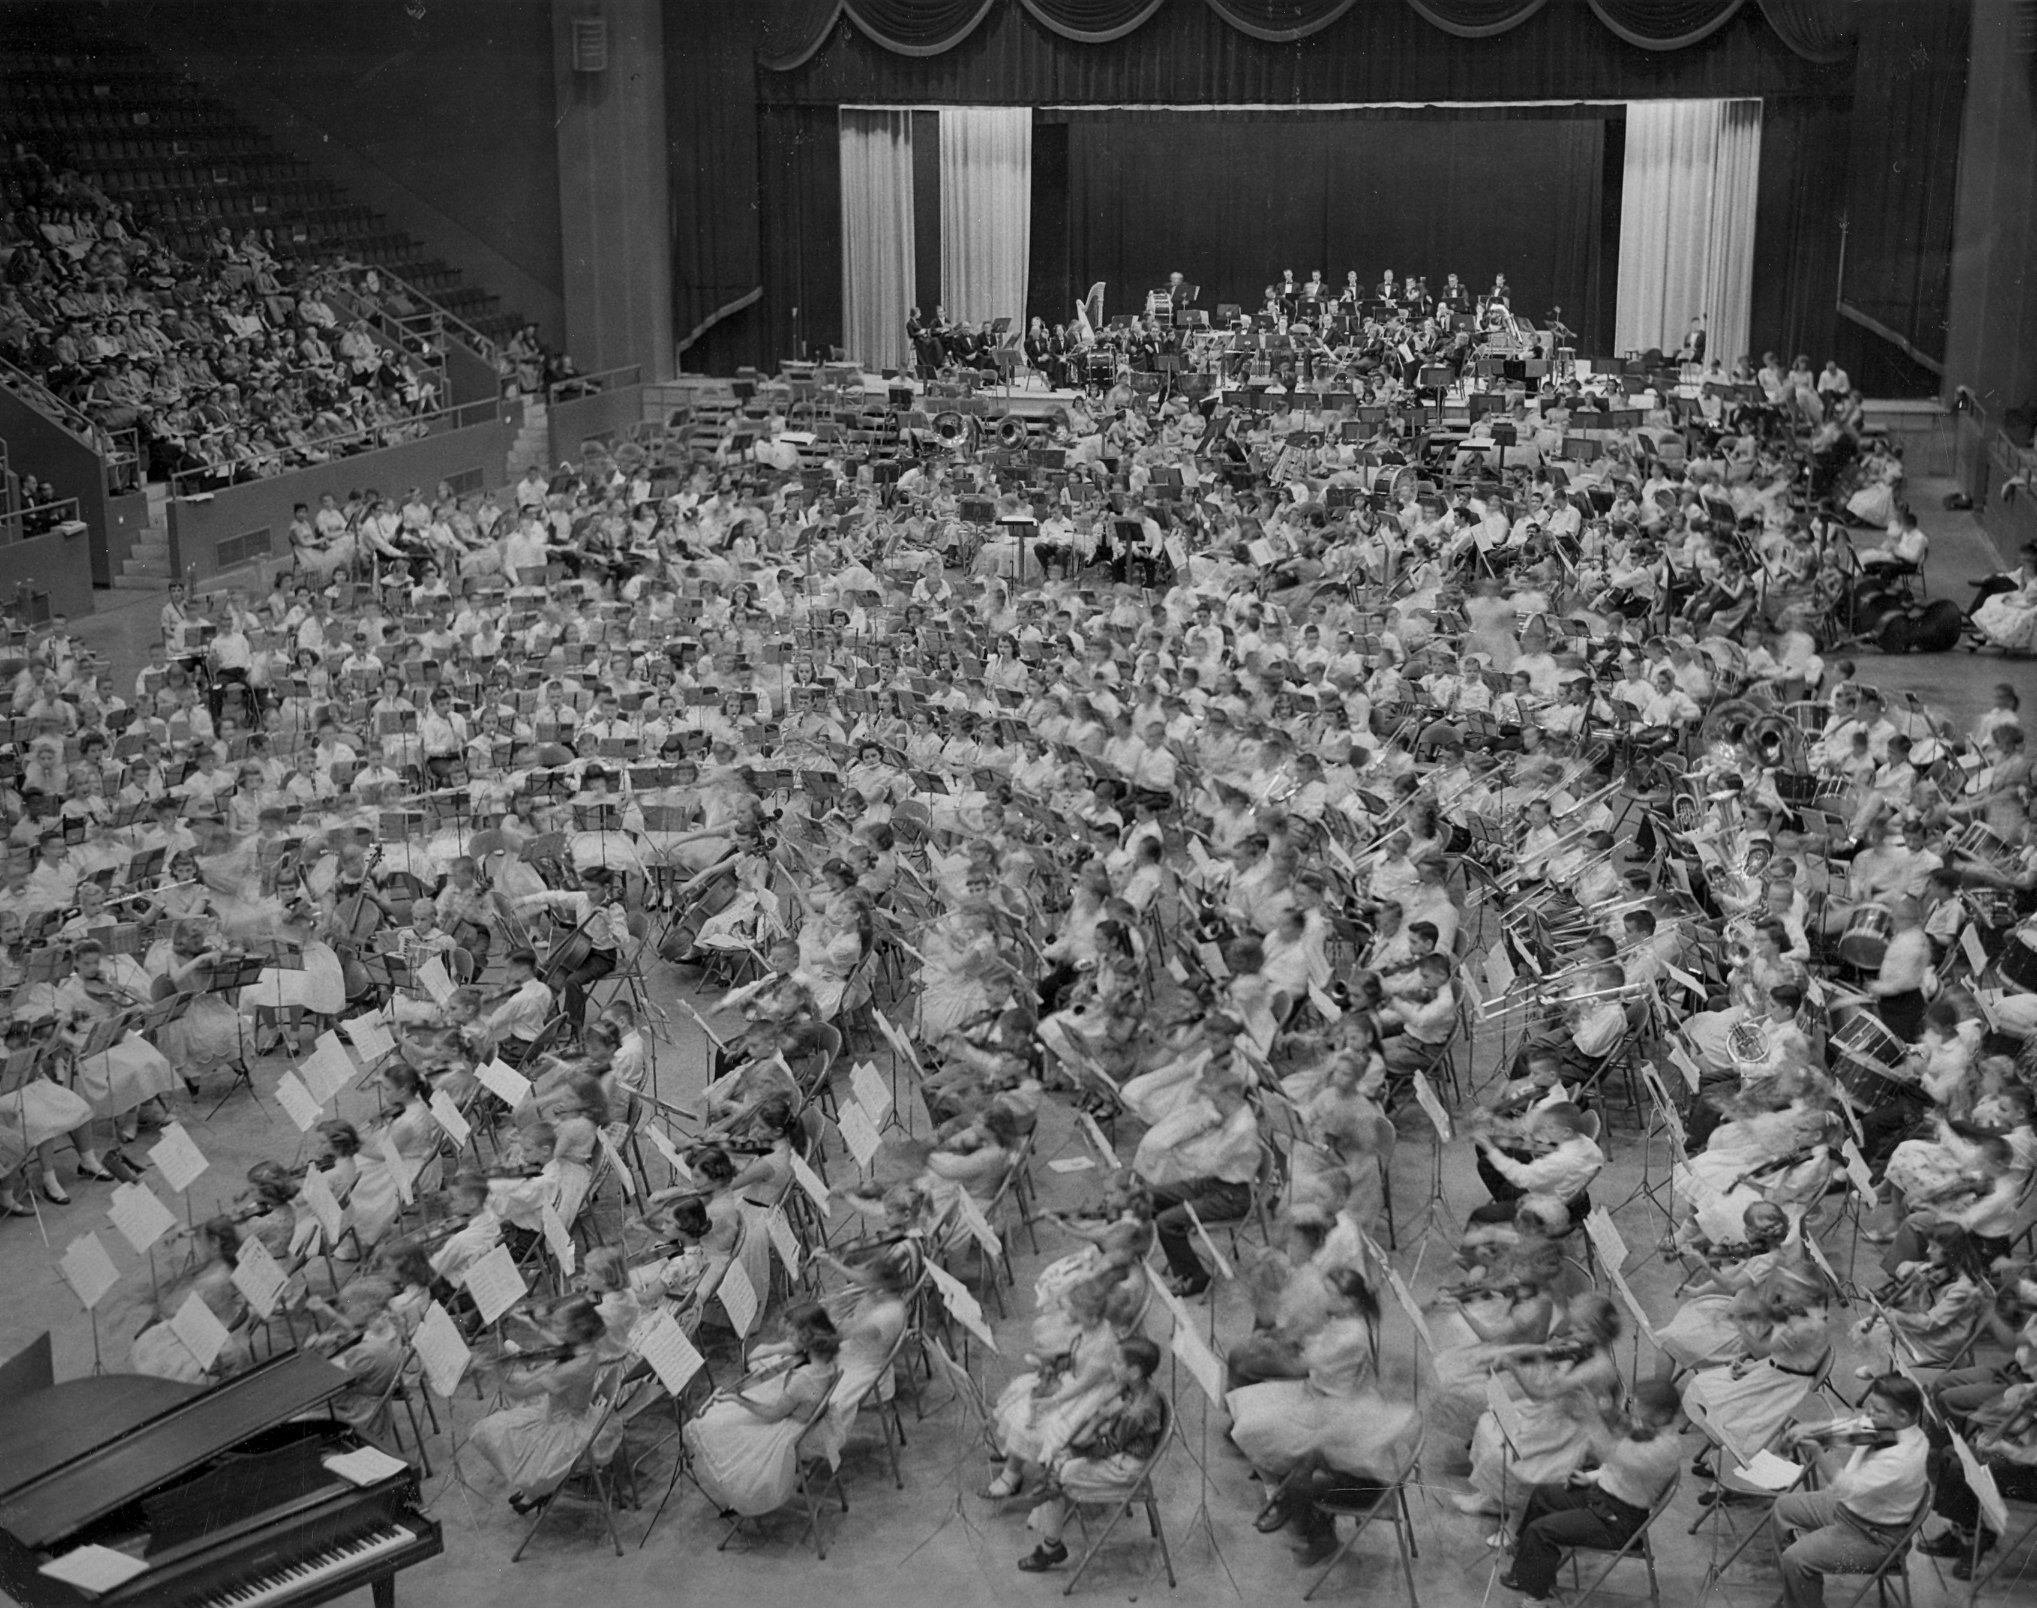 On this day in Sioux City history: Members of the Sioux City Symphony Orchestra and Sioux City school music students performed in the Municipal Auditorium on April 26, 1957. #siouxcityhistory